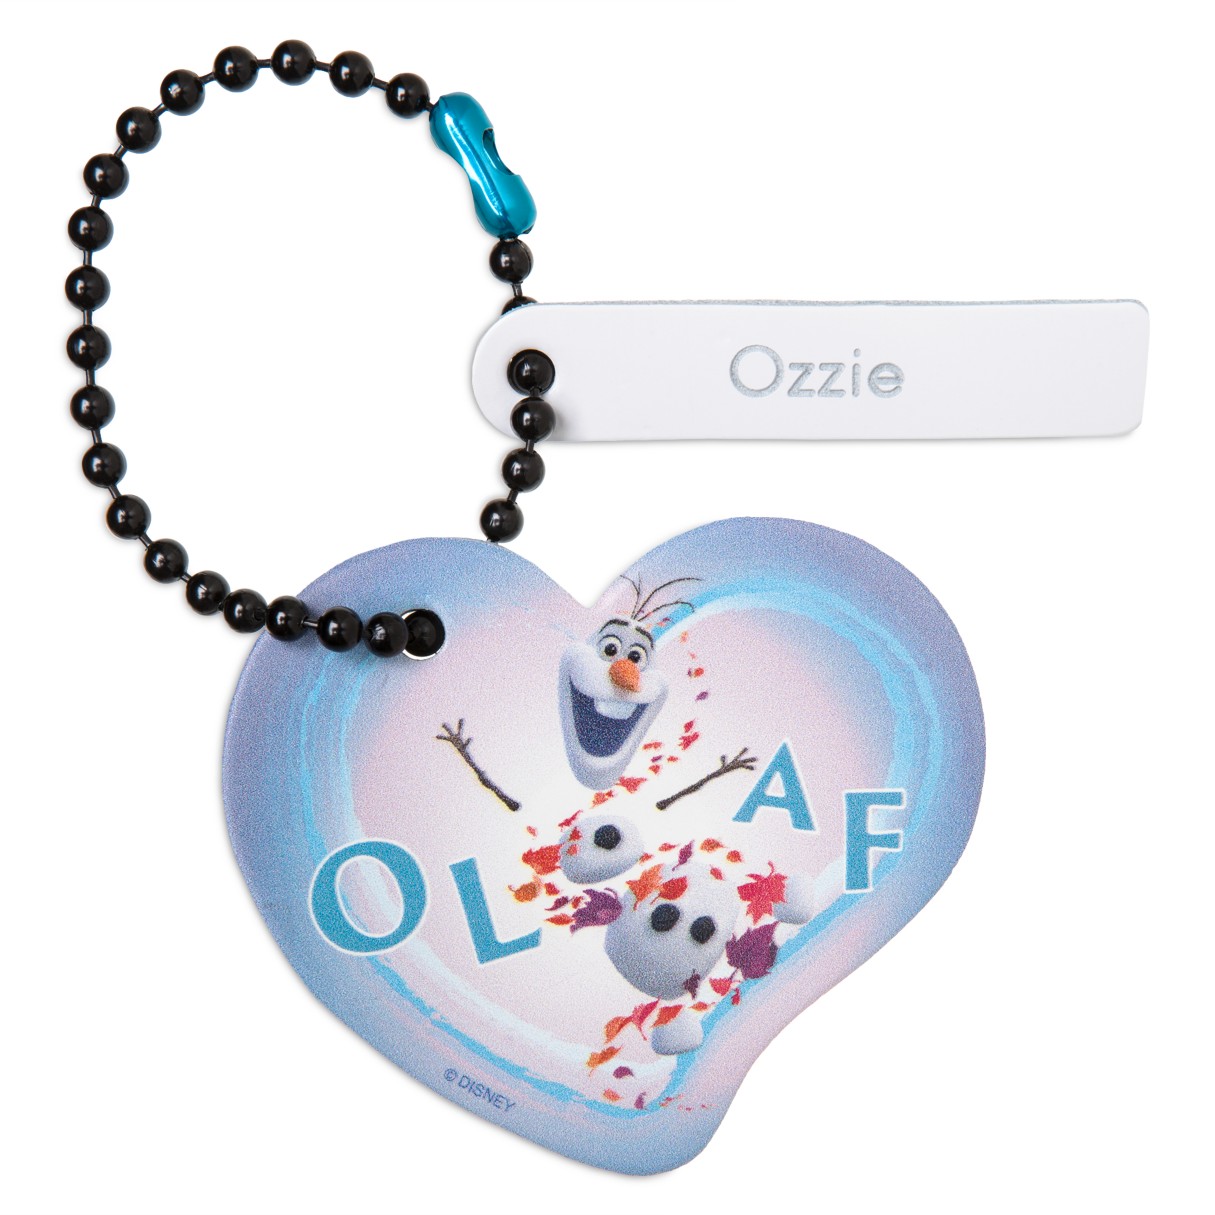 Olaf Heart Tag by Leather Treaty – Frozen 2 – Personalized